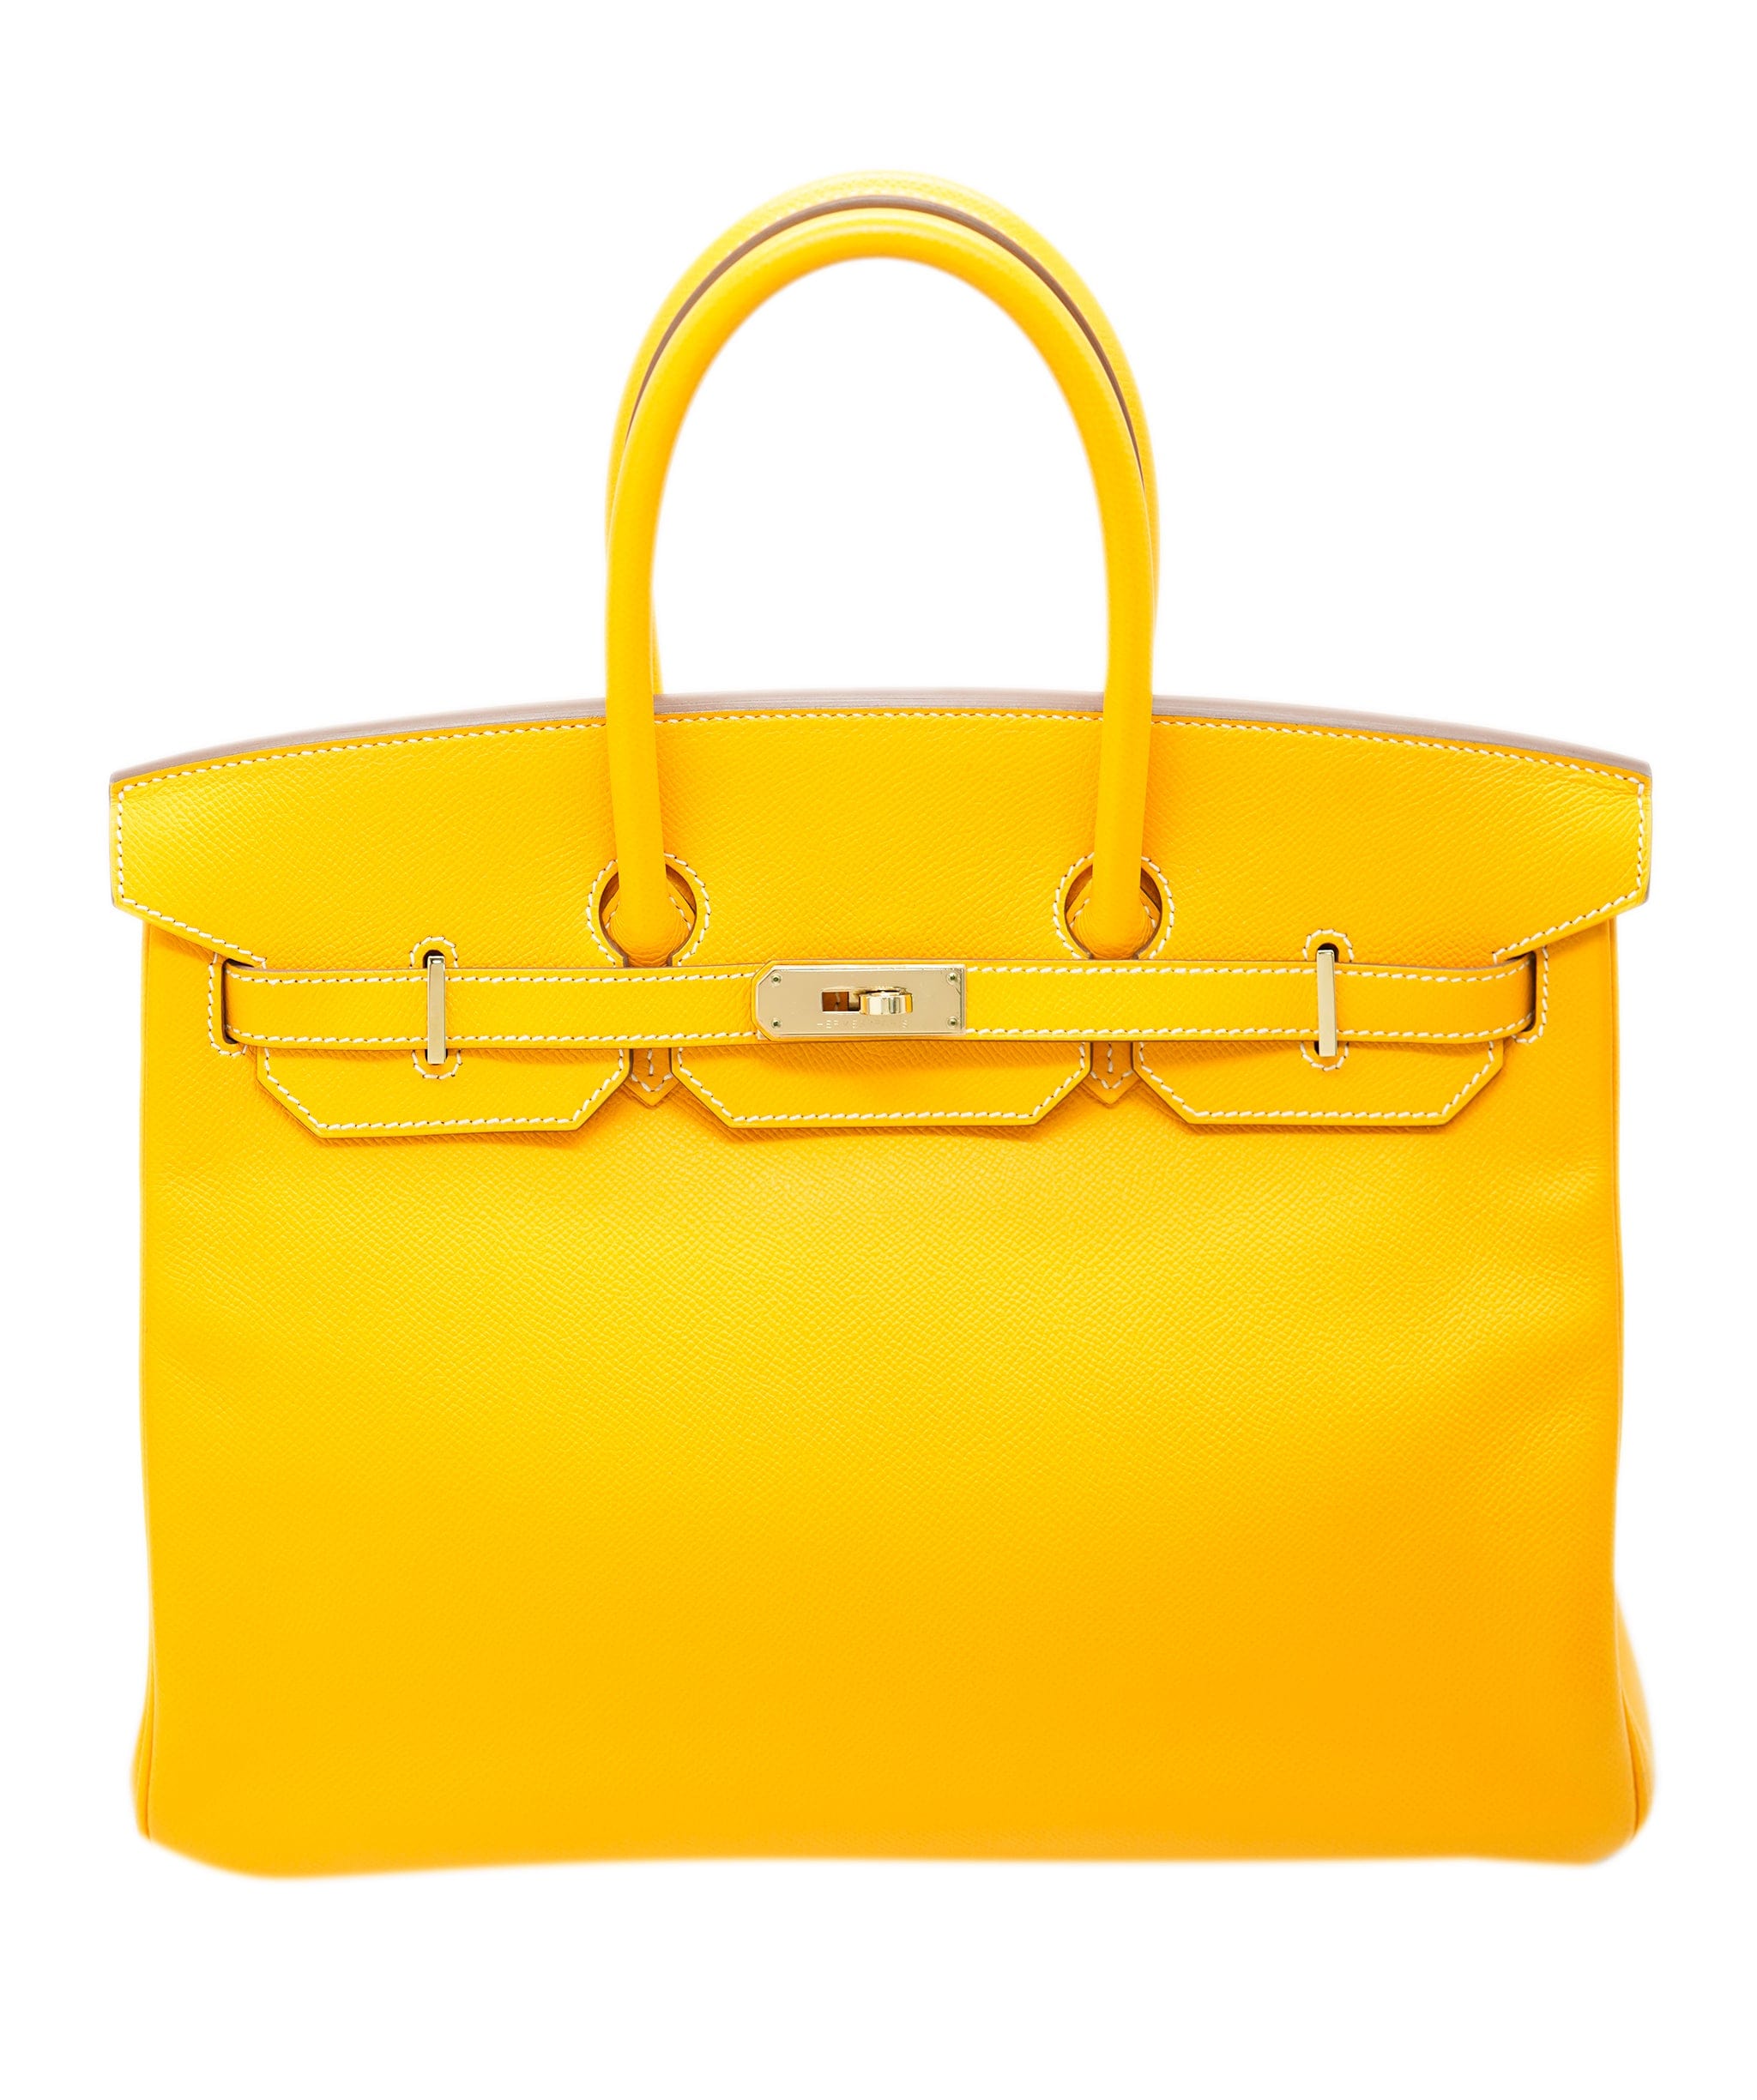 Hermès Hermes B35 Jaune D'or Candy Collection With Potiron Interior Epsom Permabrass hardware ASC4996